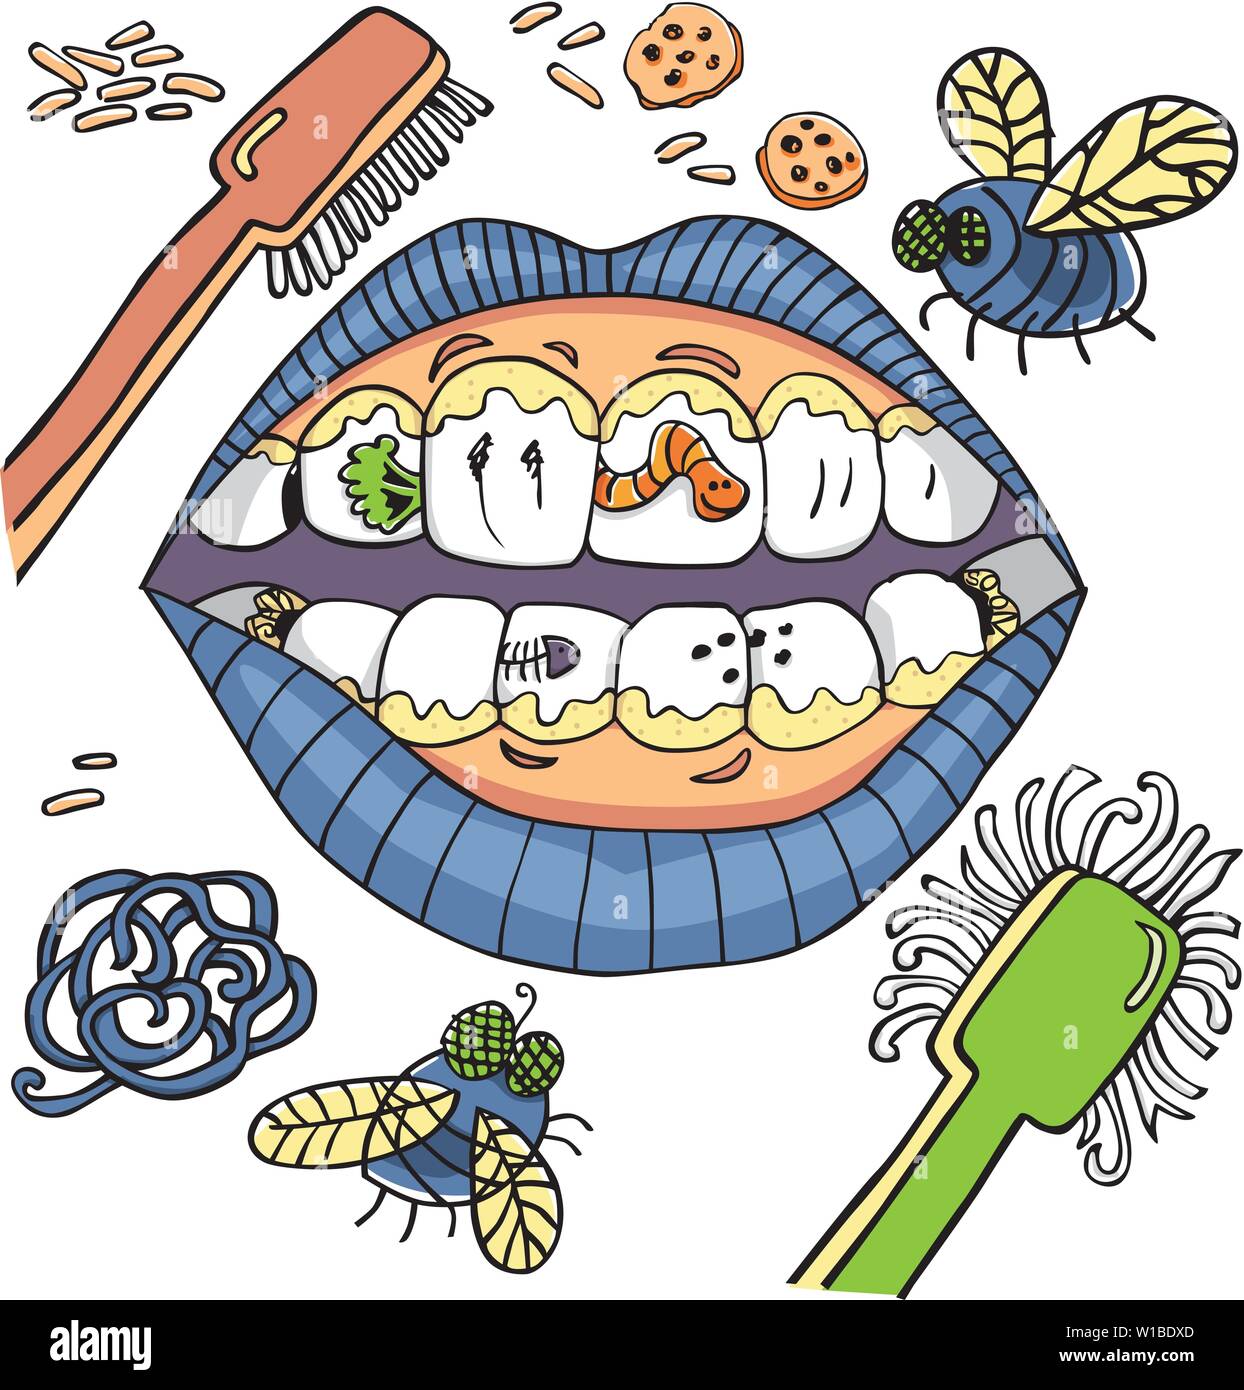 Vector dental hygiene humour with mouth showing dirty teeth with worms and plaque and vegetables. Stock Vector